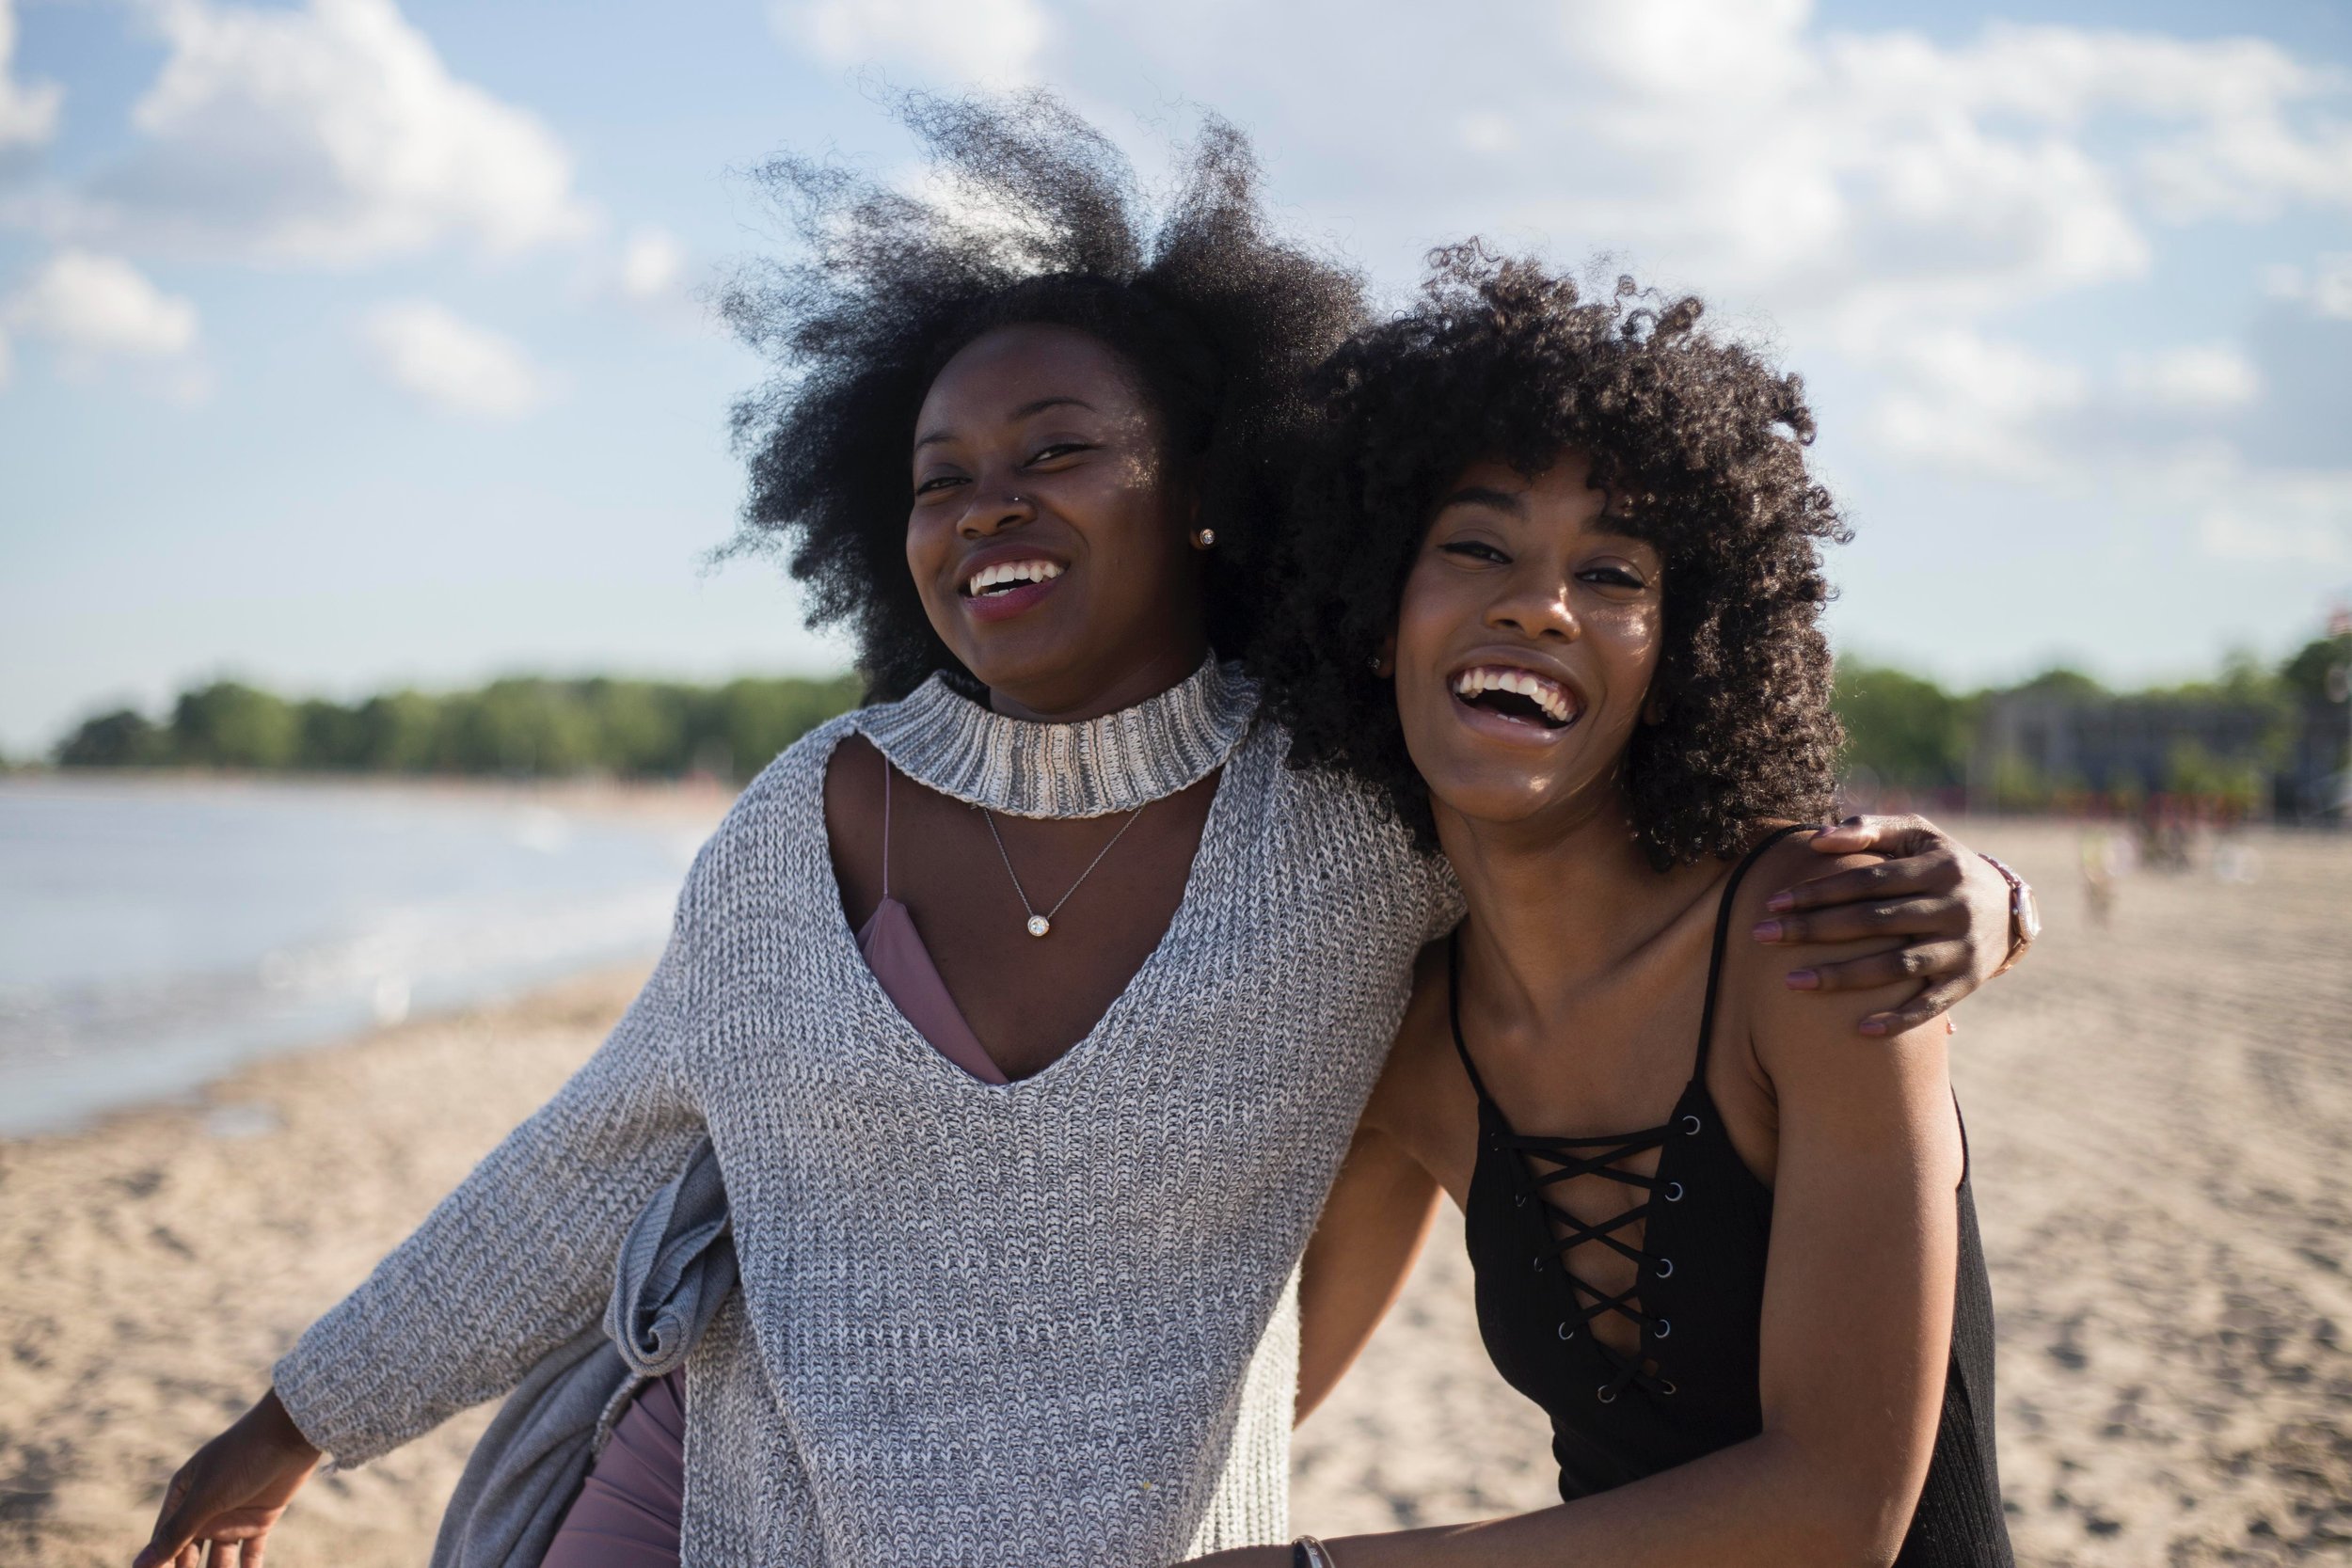  A Black pair of young female-presenting people in an outdoor setting next to a lake. They are holding each other and laughing. They both have big, curly hair. The person on the left is wearing a cutout grey sweater and the person on the right is wea